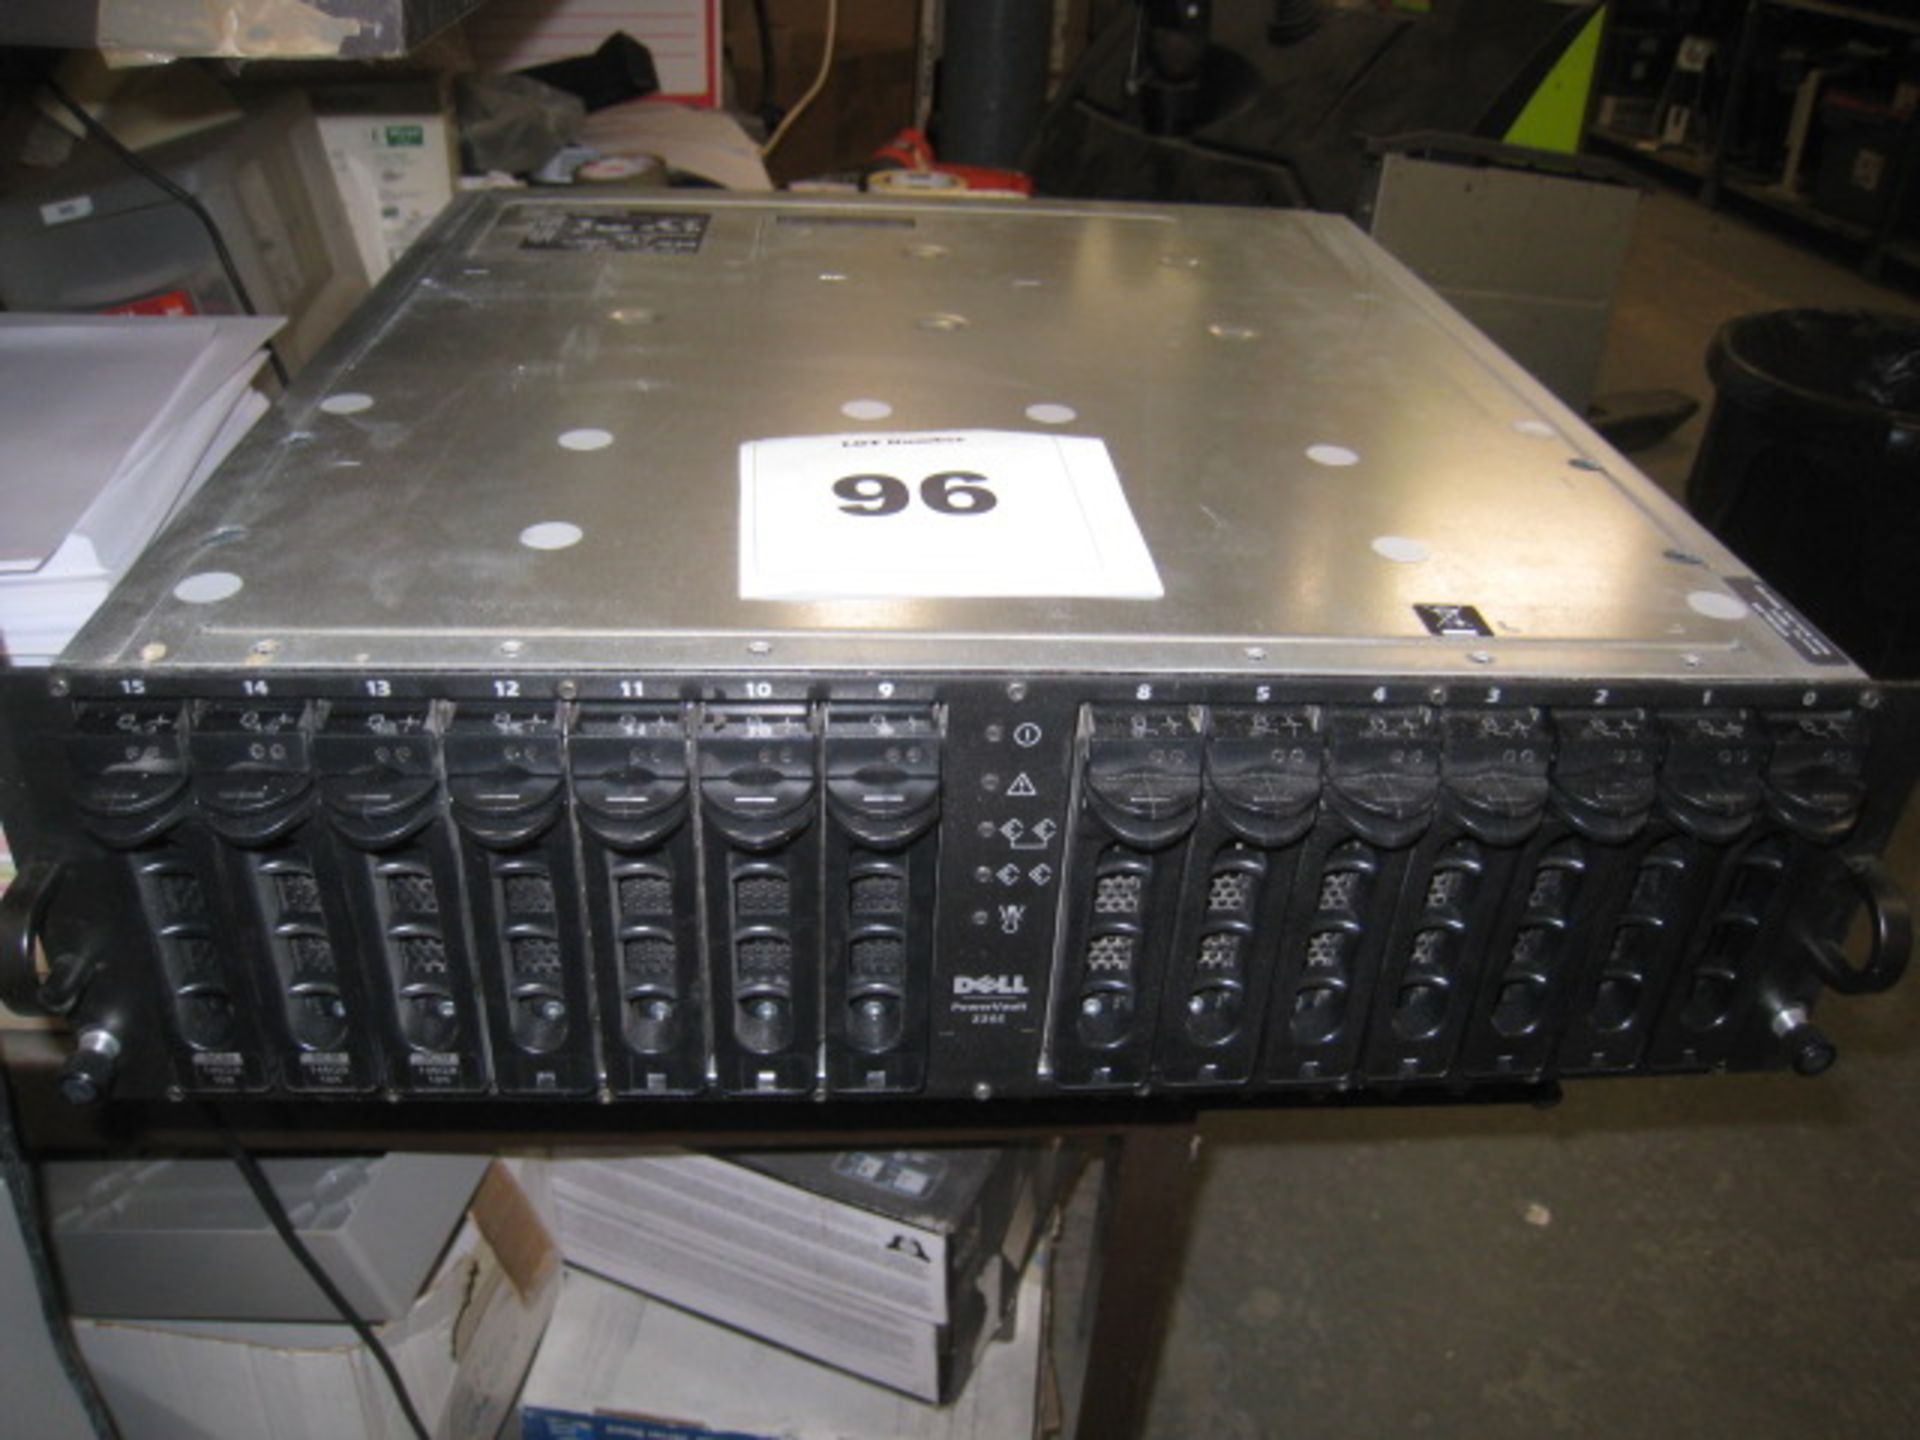 Dell Powervault 220S hard drive Array fitted with 14 X 146gb 3.5" HDD